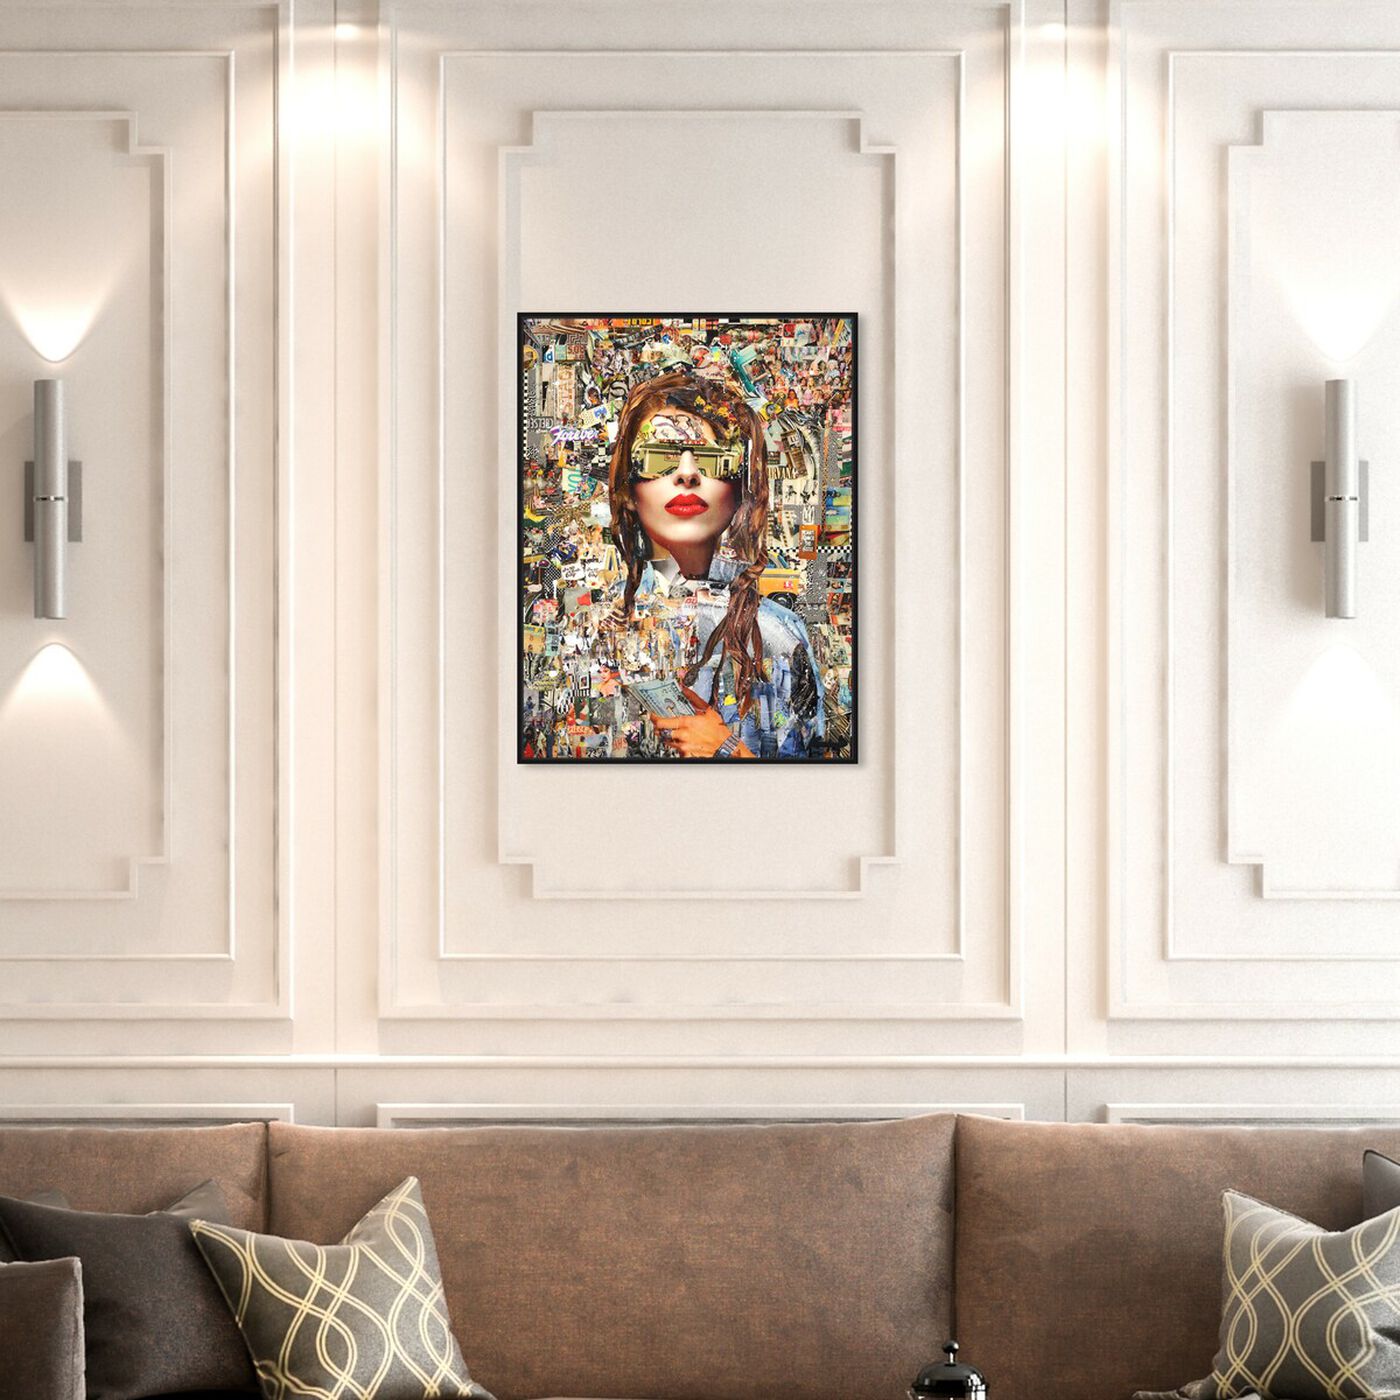 Hanging view of Katy Hirschfeld - Successful featuring fashion and glam and portraits art.